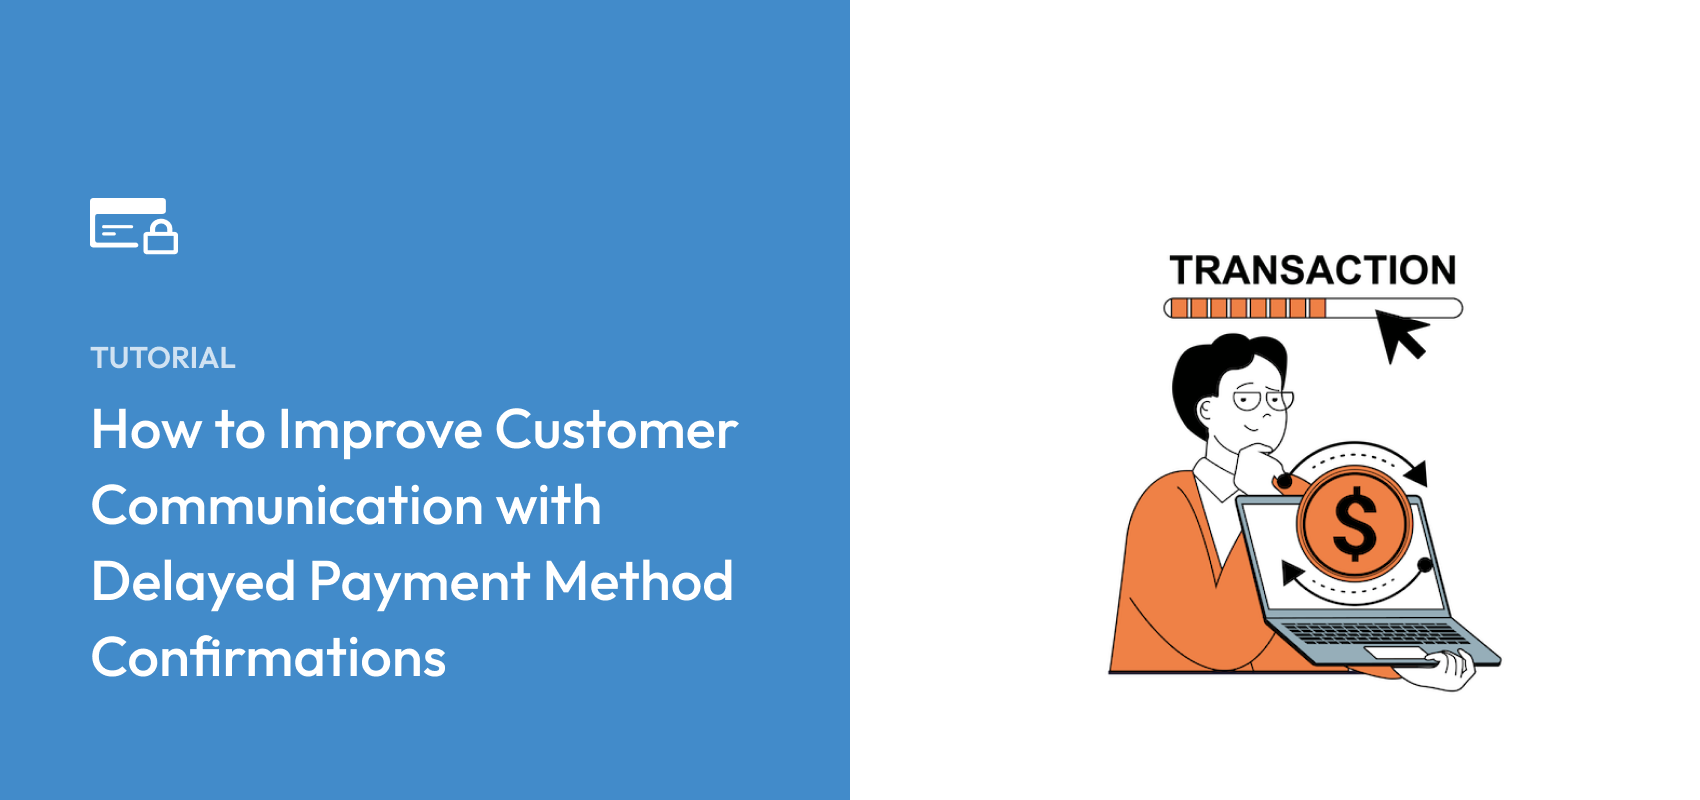 How to Improve Customer Communication with Delayed Payment Method Confirmations